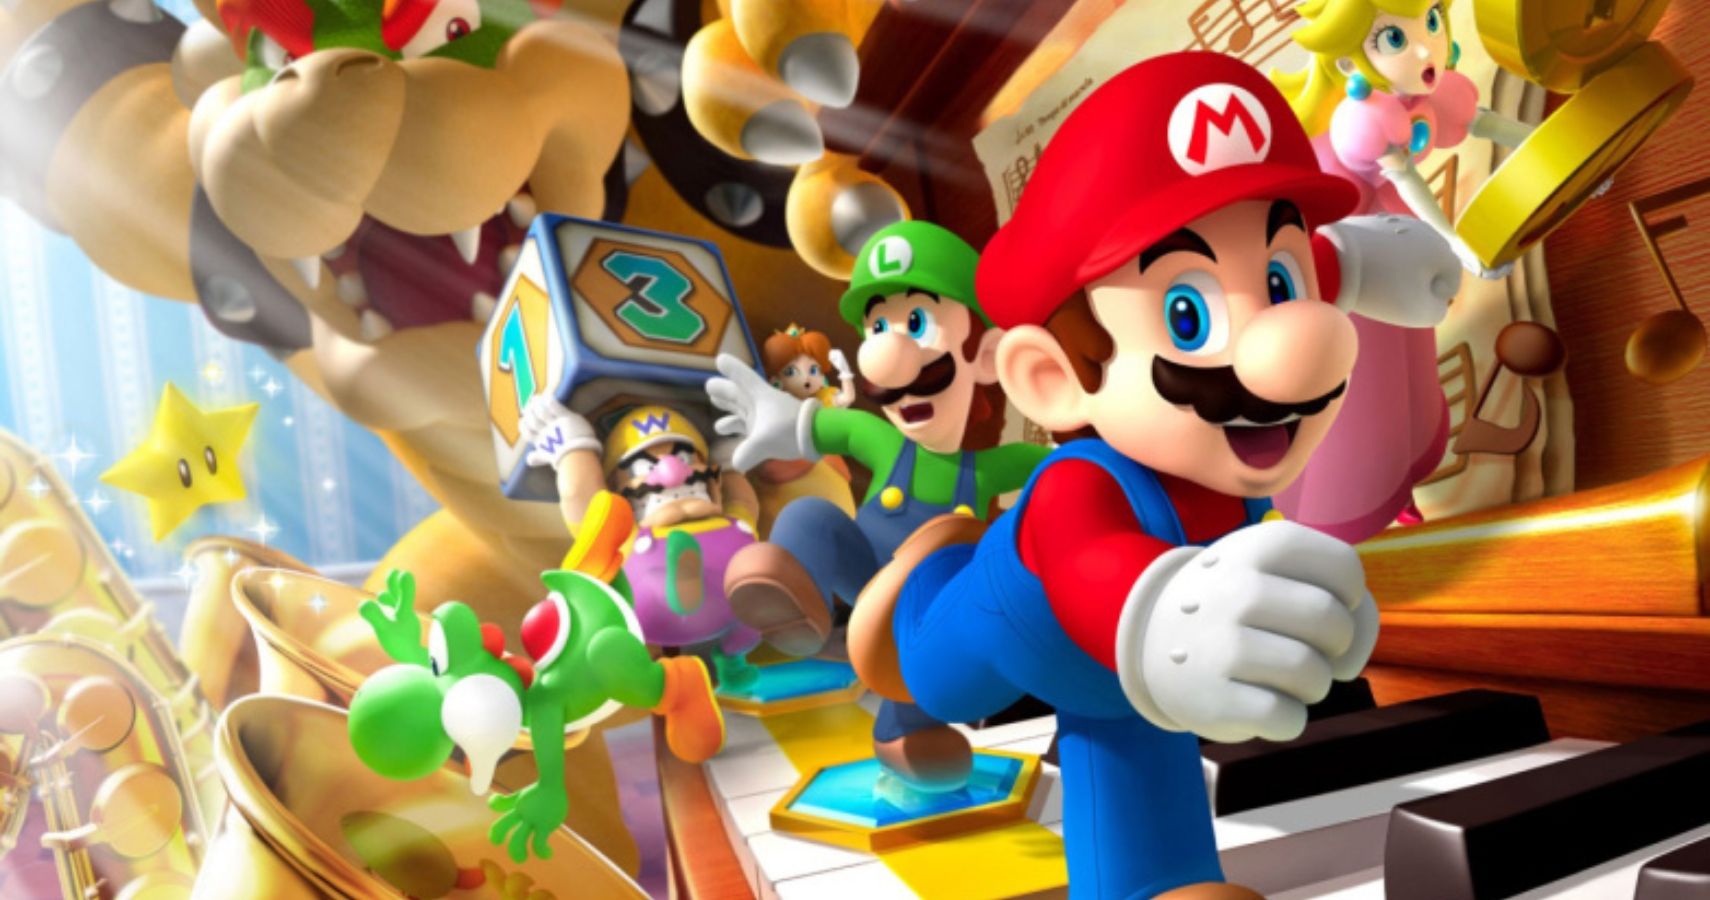 Nintendo Asks Mobile Partners To Tone Down Microtransactions To Keep Players From Spending Too Much